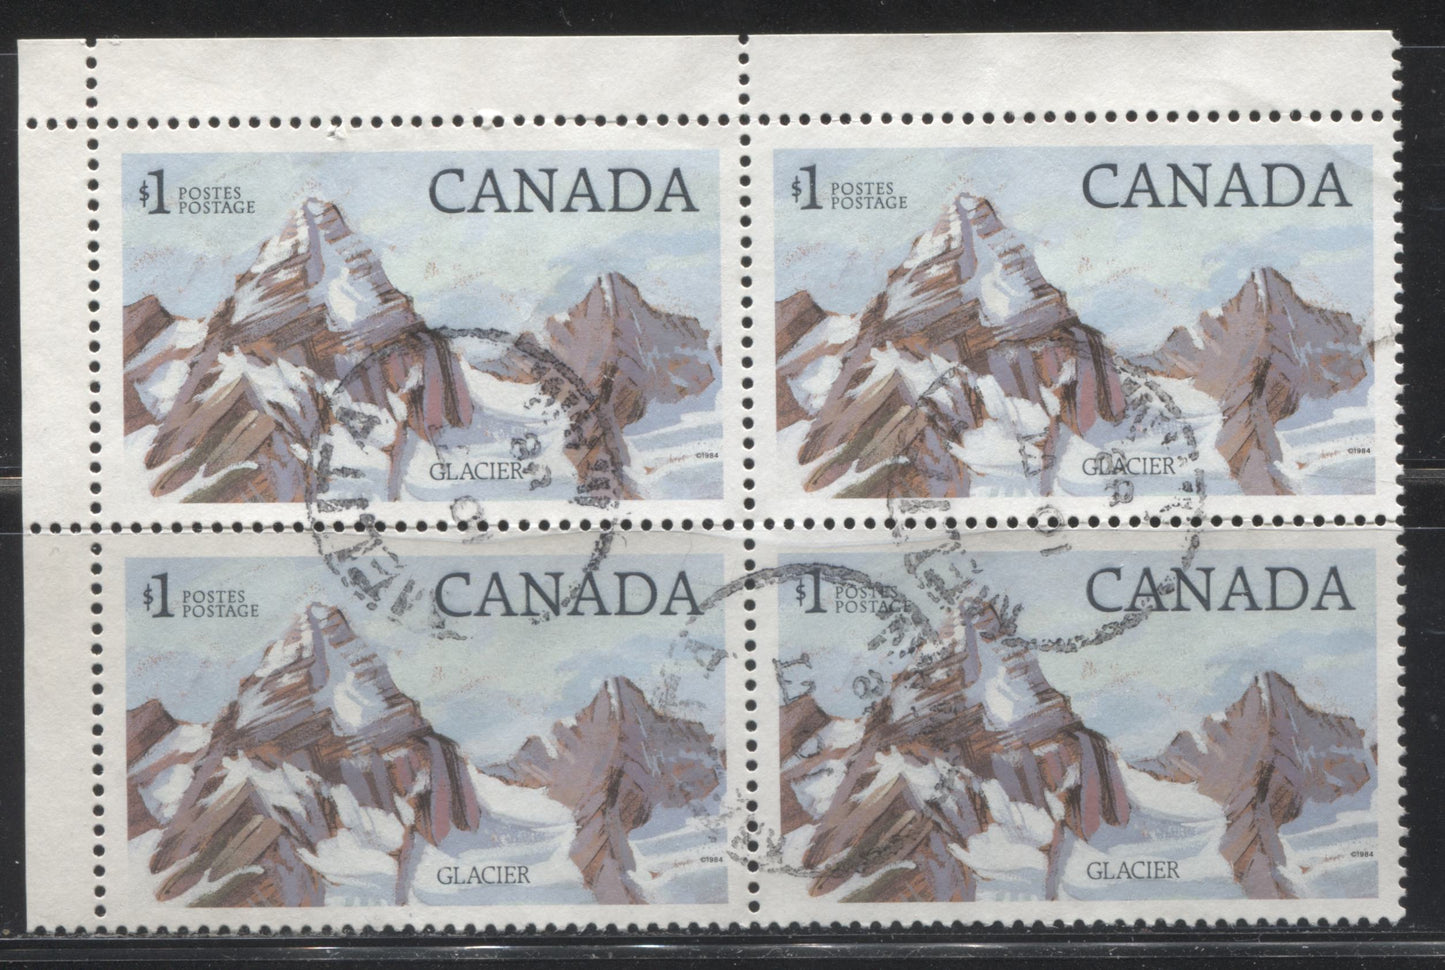 Canada #934iv $1 Multicolored Glacier National Park Stamps From The 1982-1987 Artifacts and National Parks Issue. A Used UL Field Stock Block, VF80